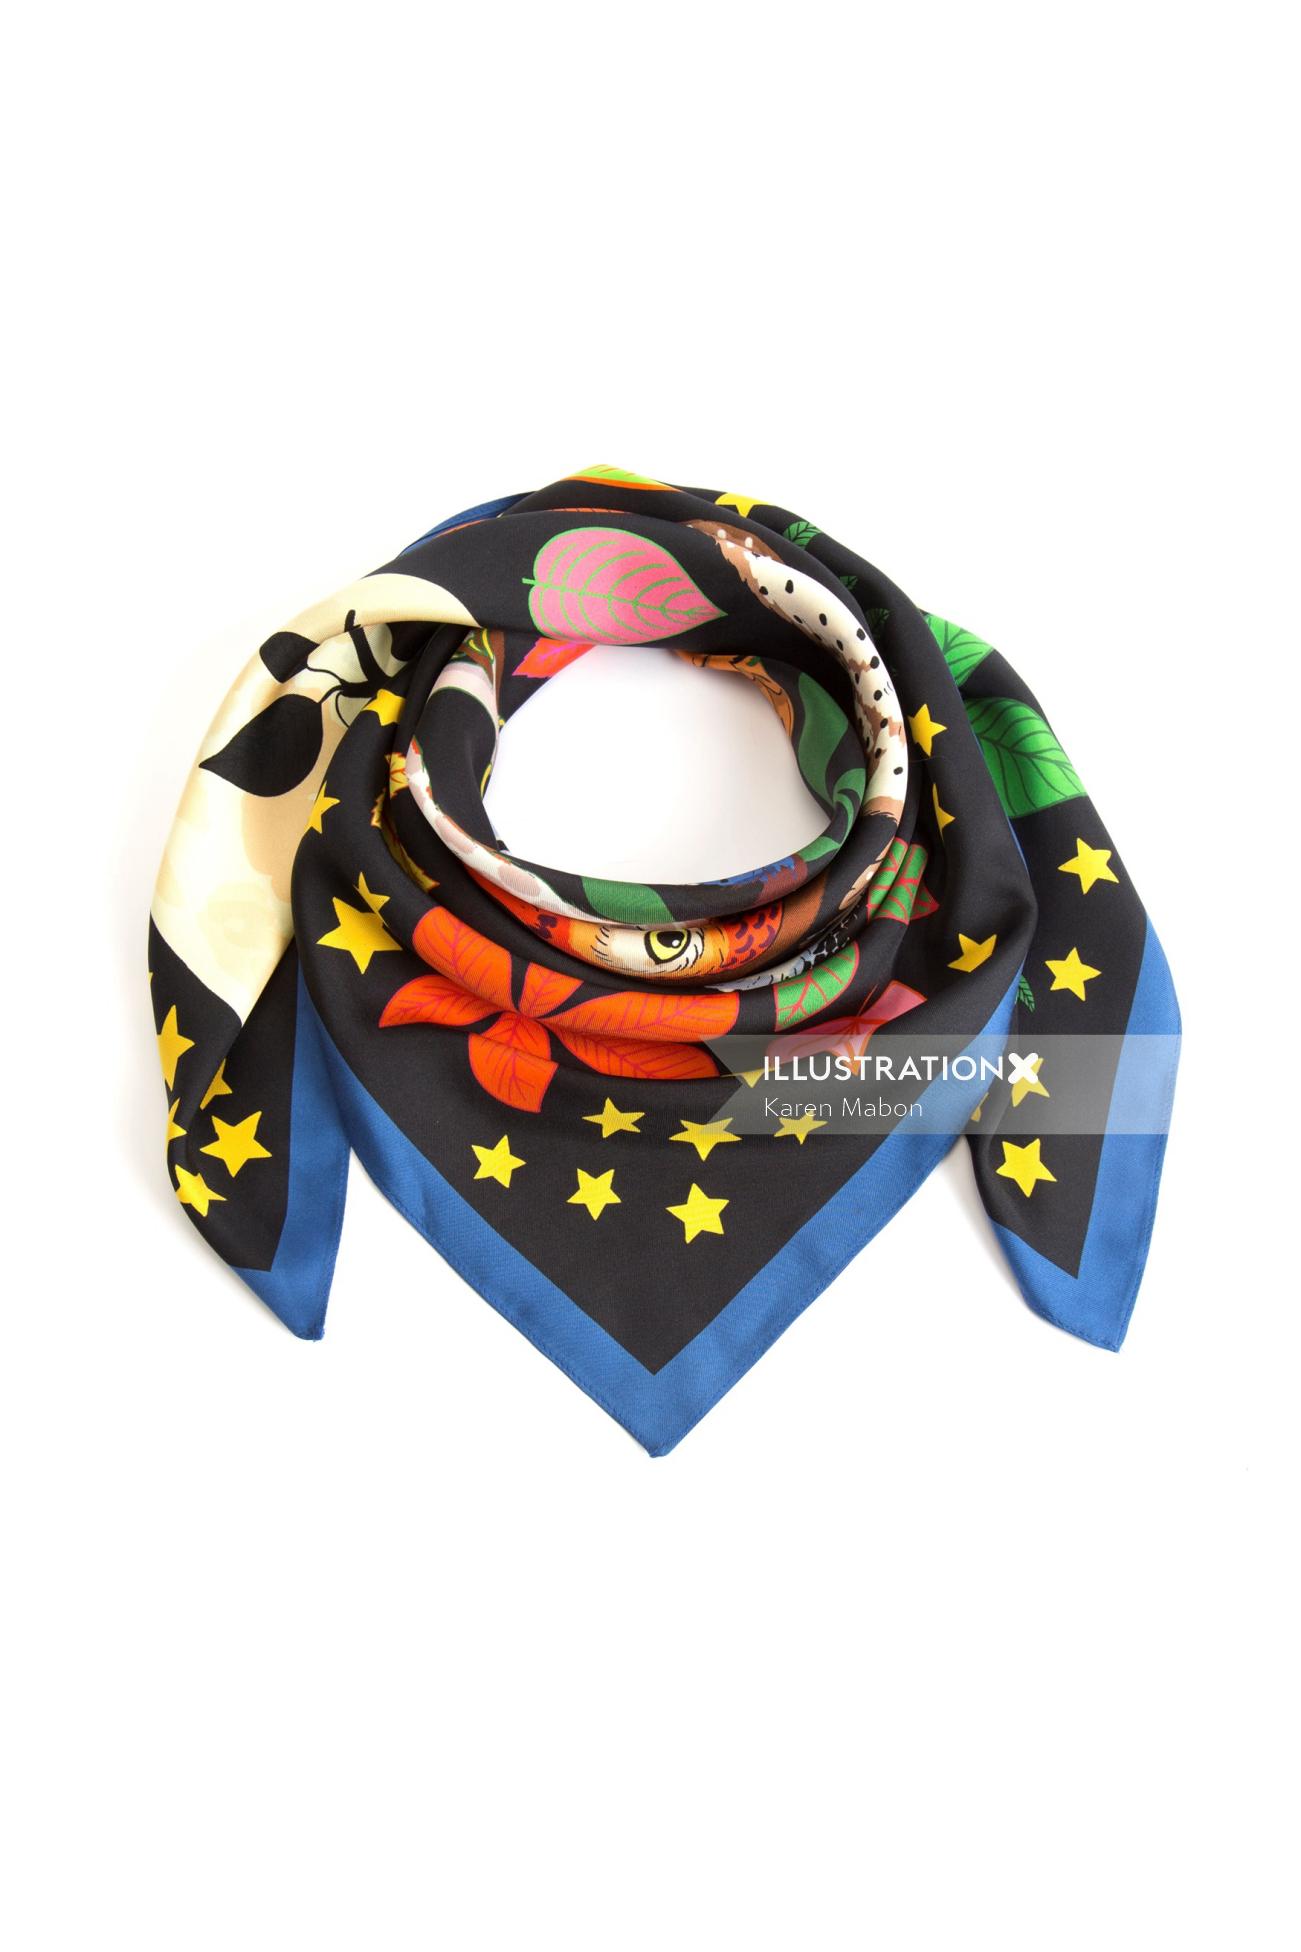 A Rolled Silk Scarf of Parliament of Night Owls 